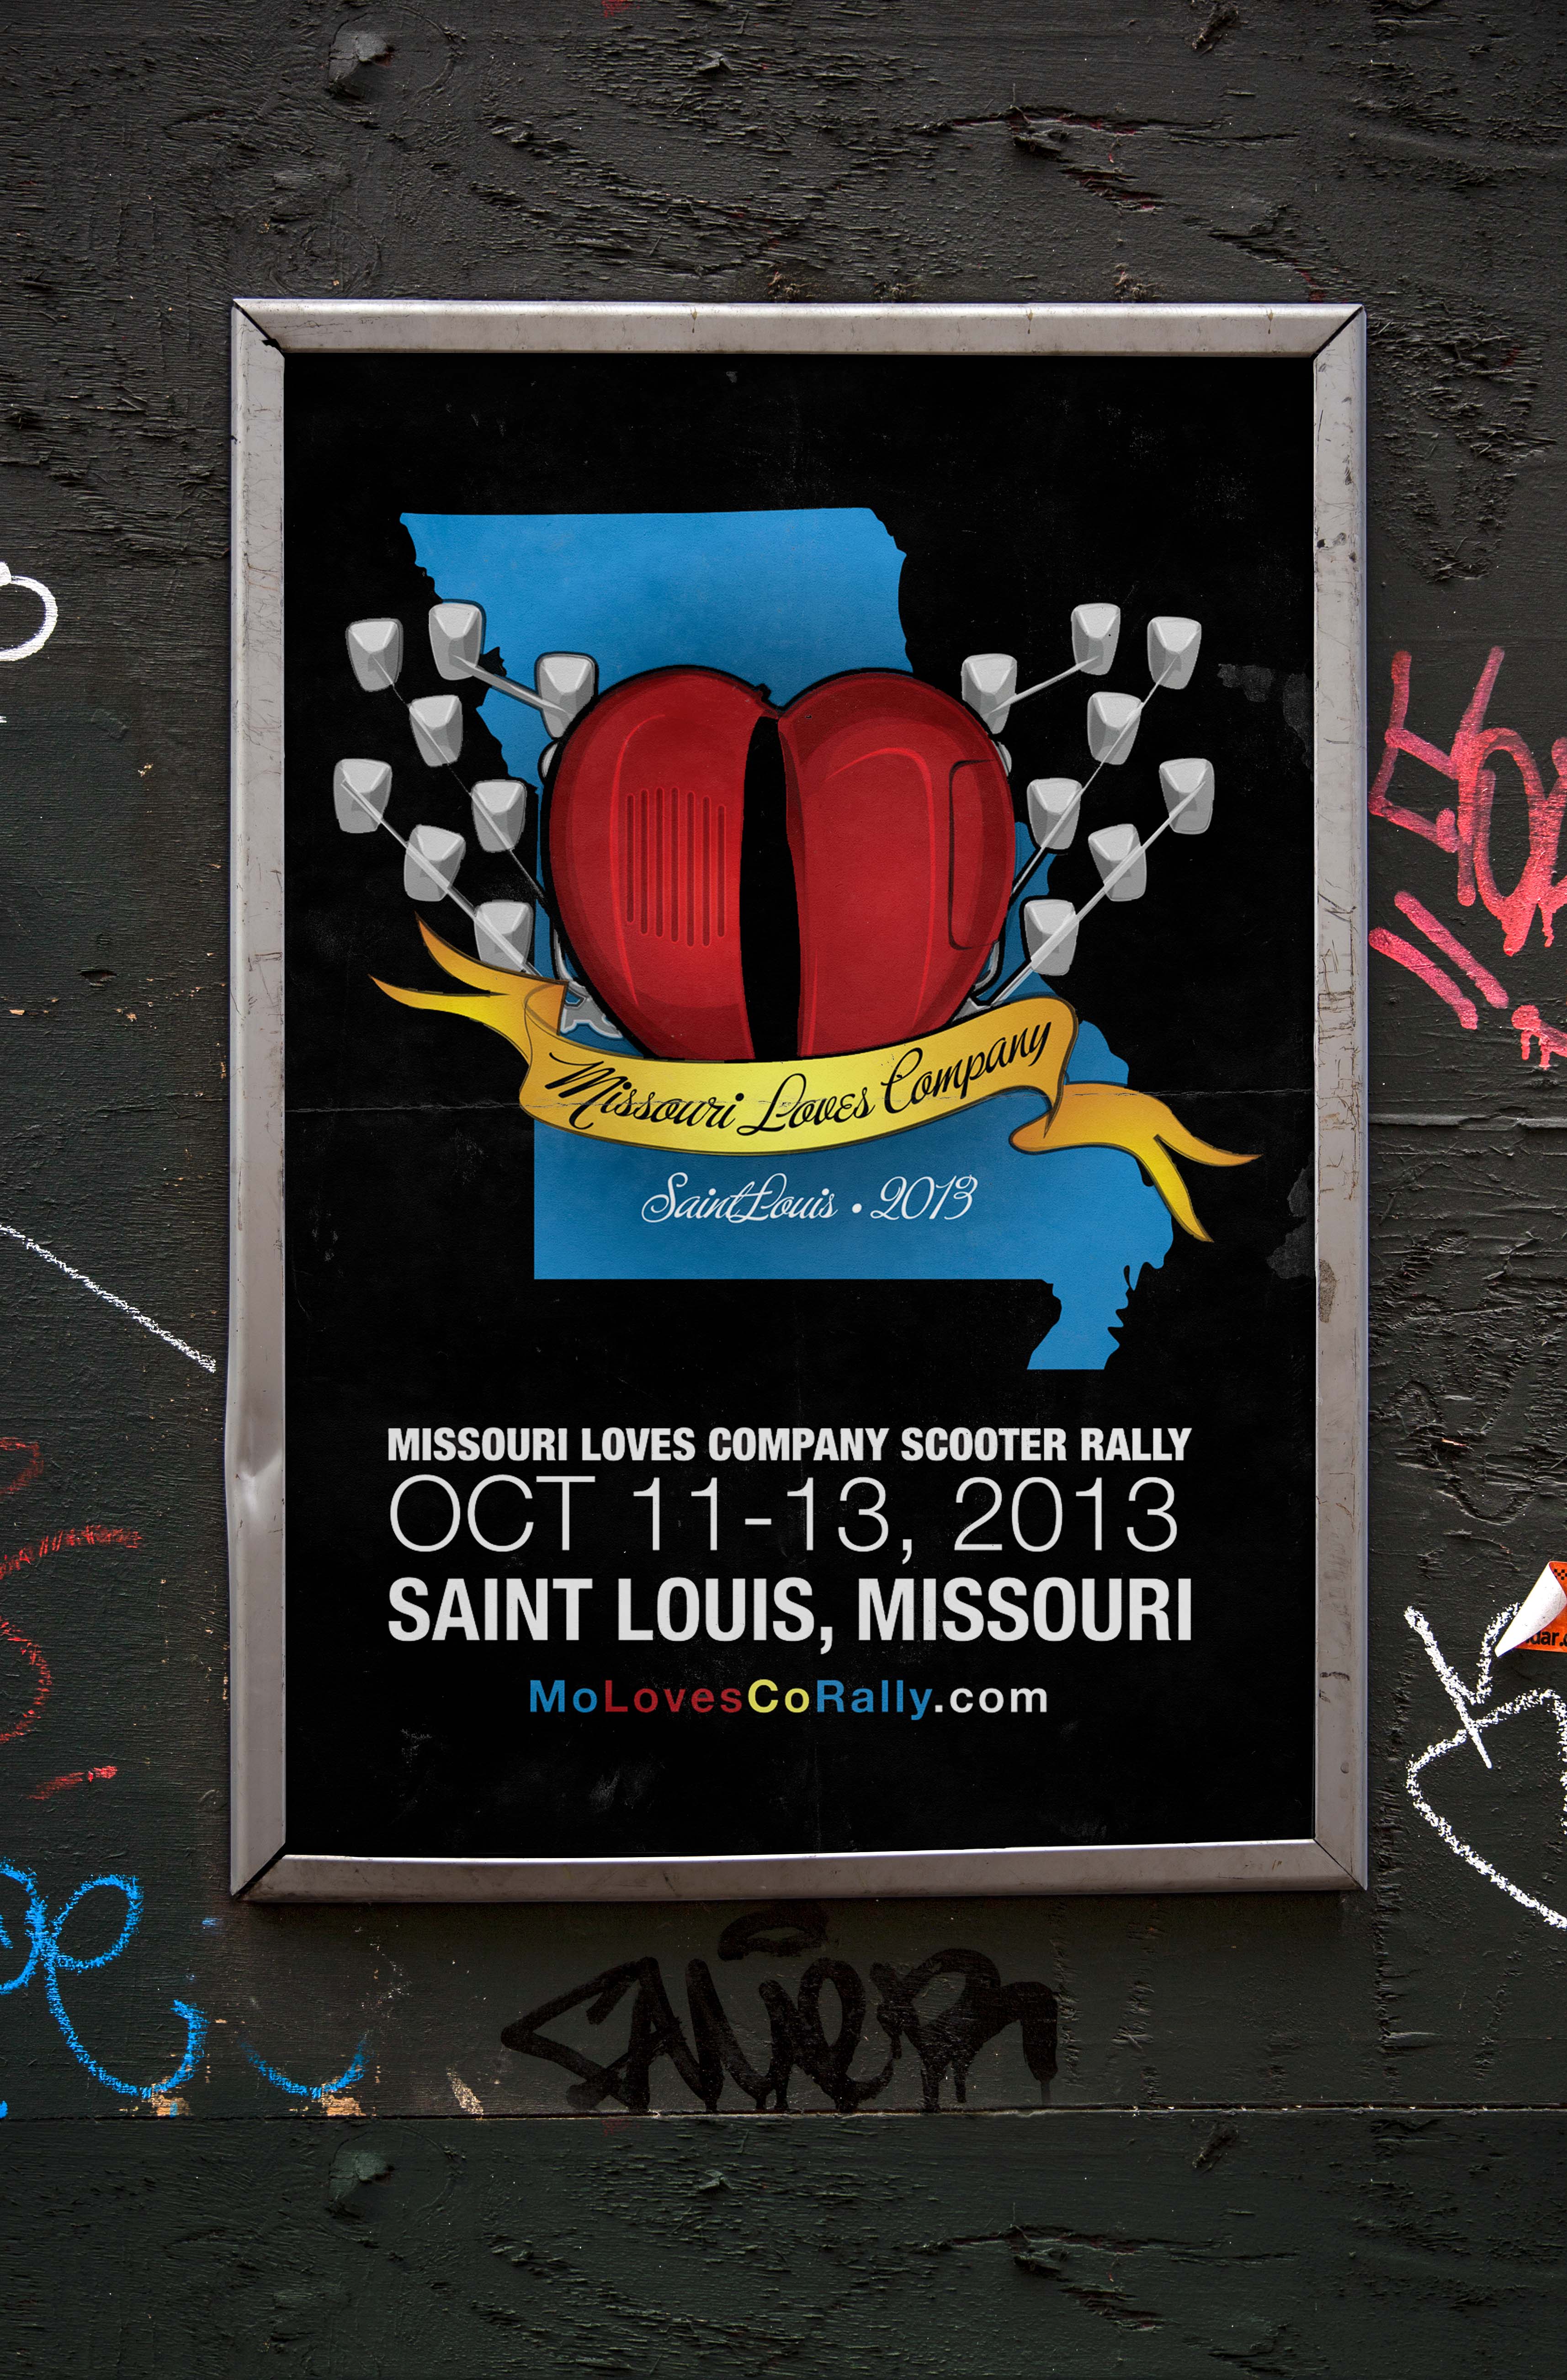 Framed Poster for Missouri Loves Company 1, a St. Louis scooter rally.